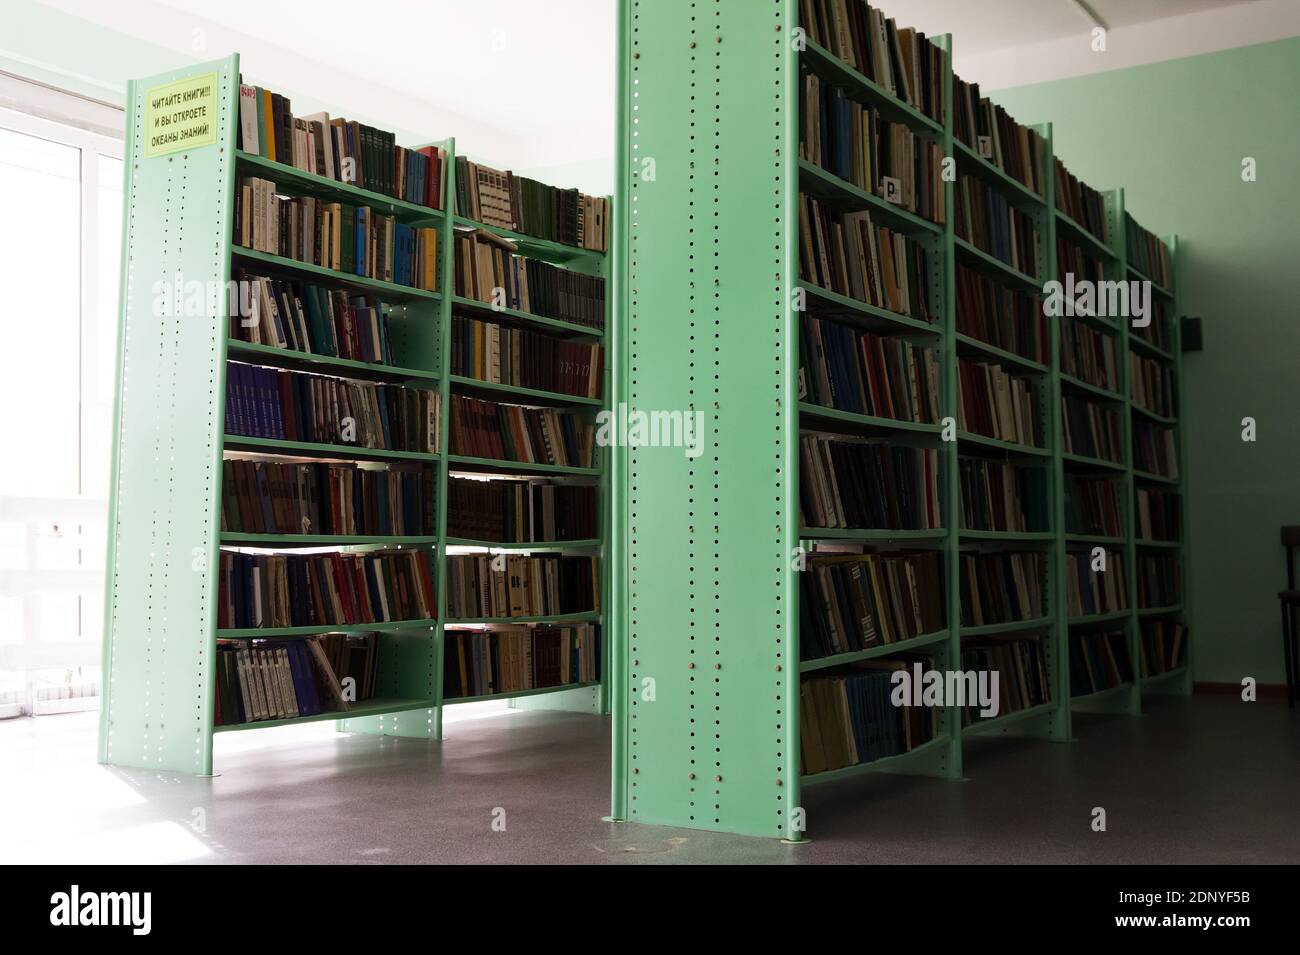 Shelves filled with books in a rural library against the background of a window. Stock Photo